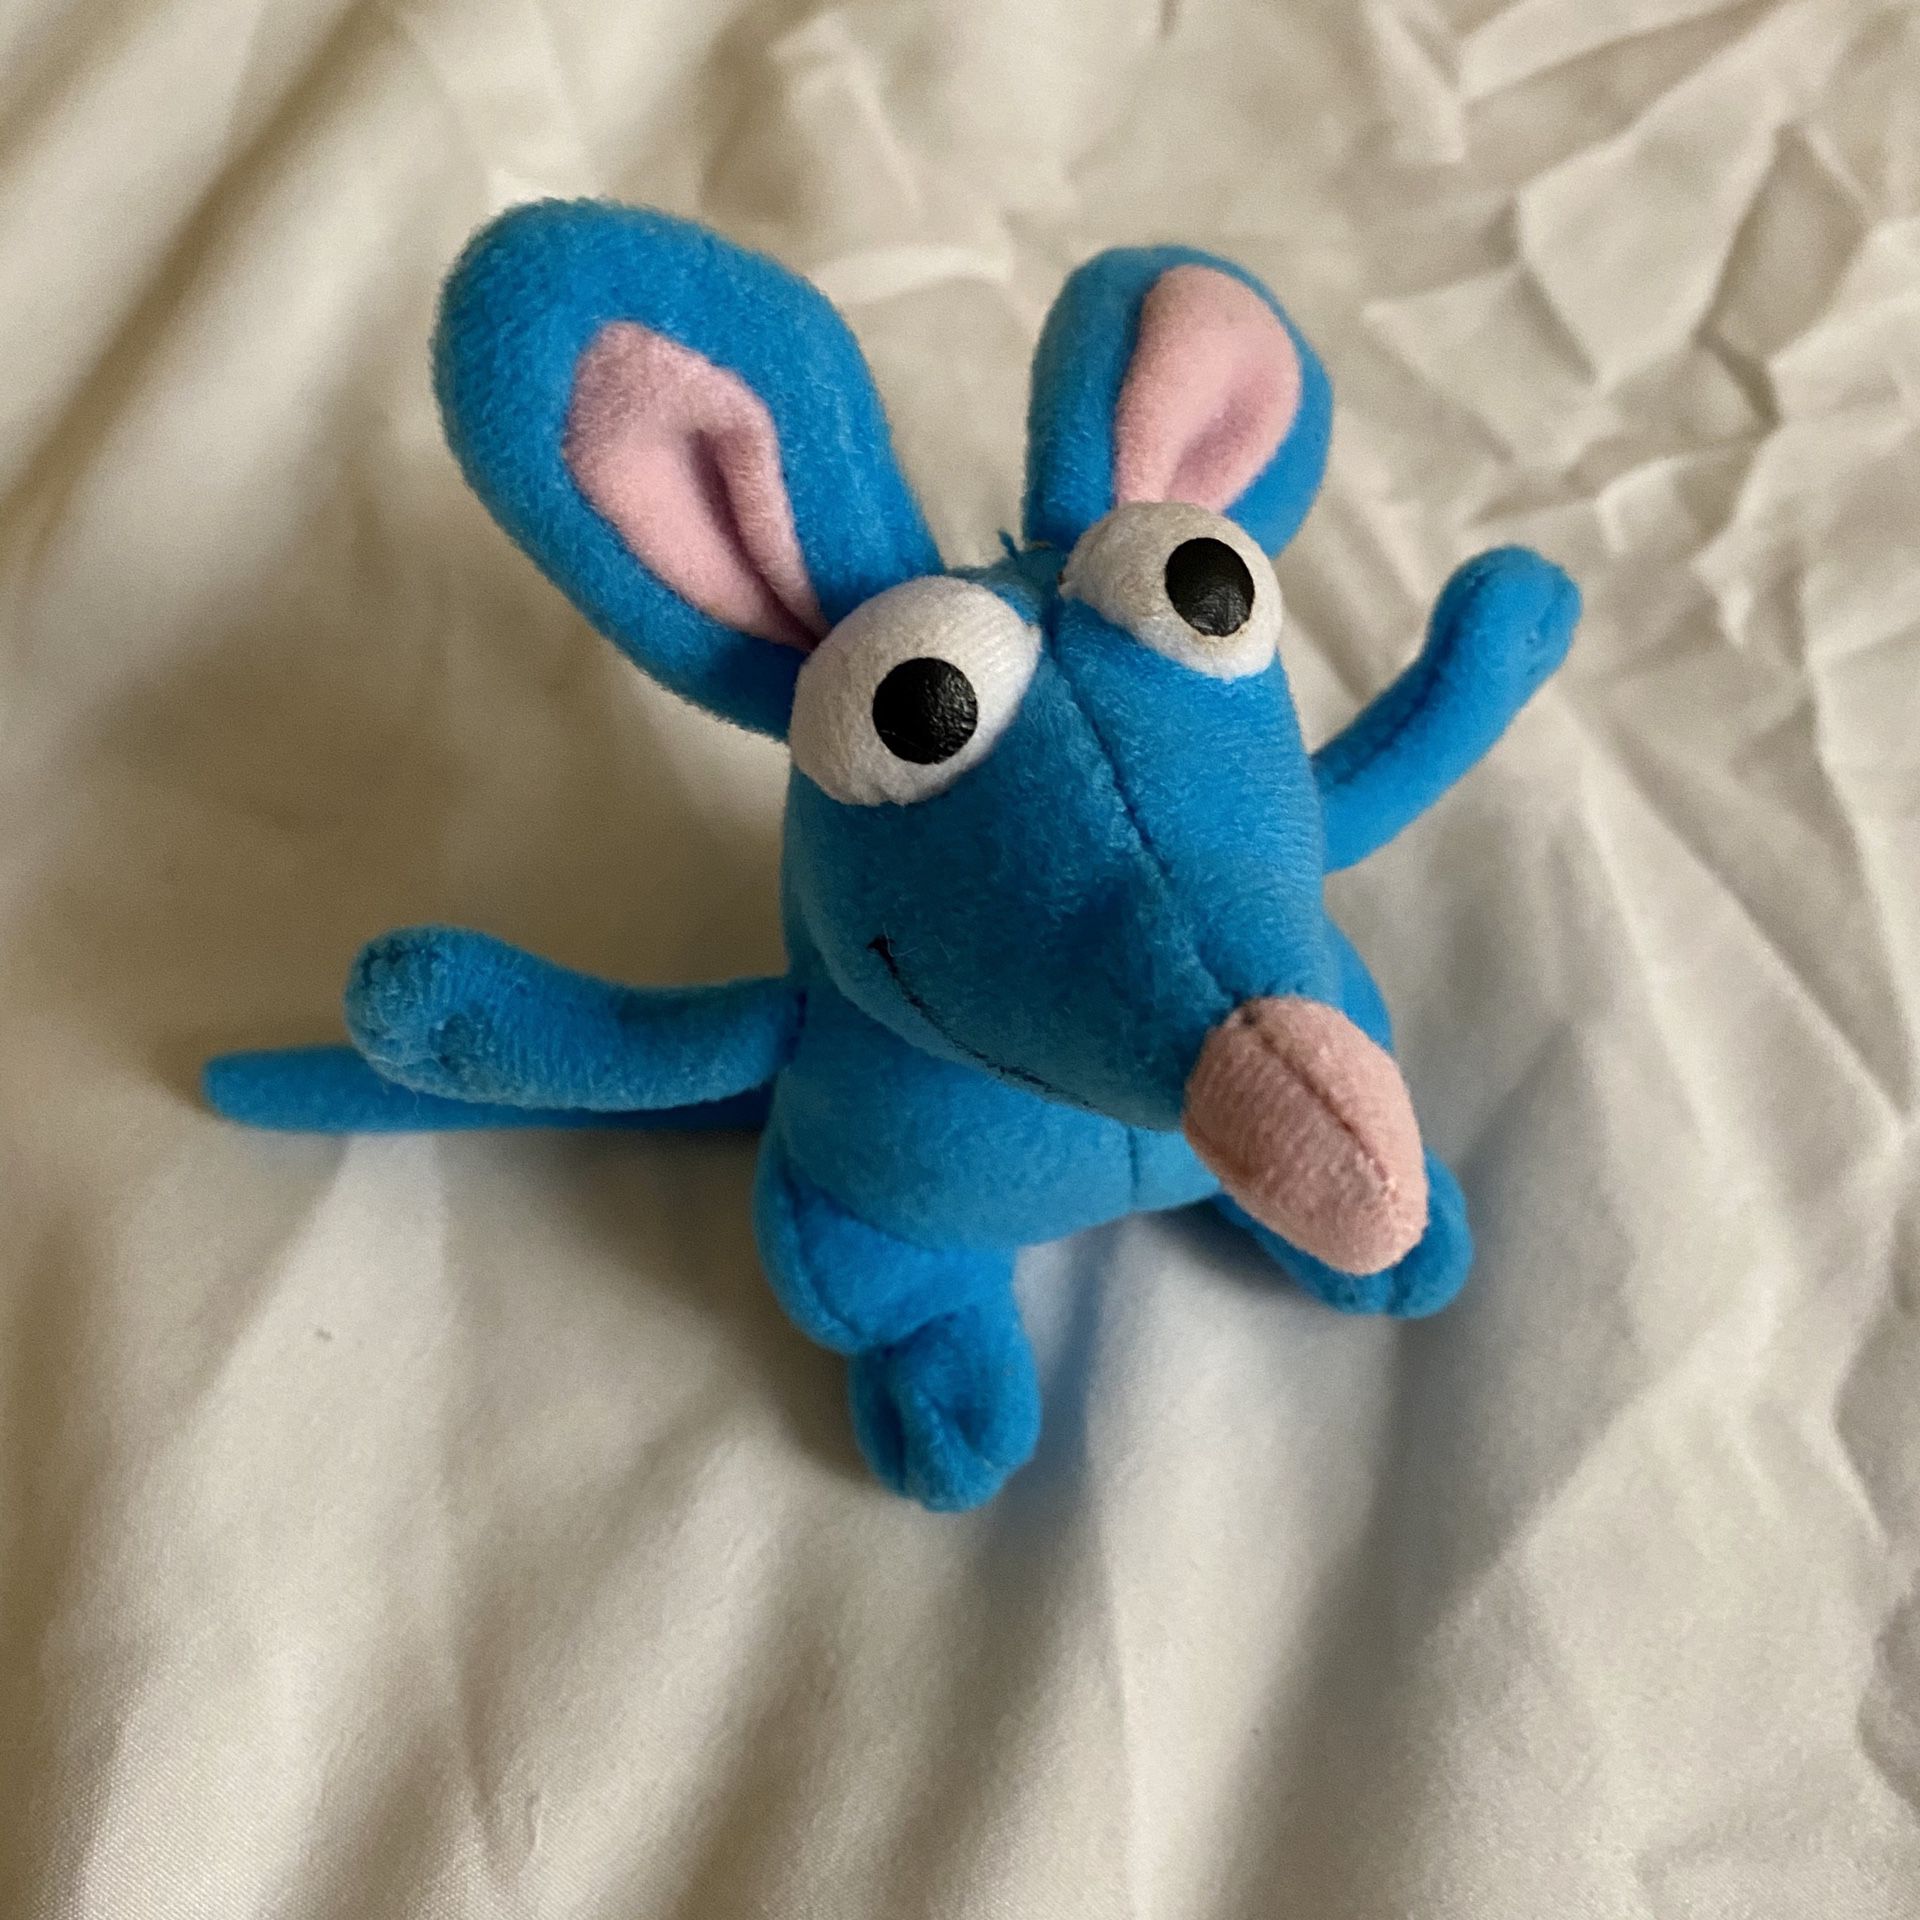 Tutter mini plushie from Bear in the Big Blue House